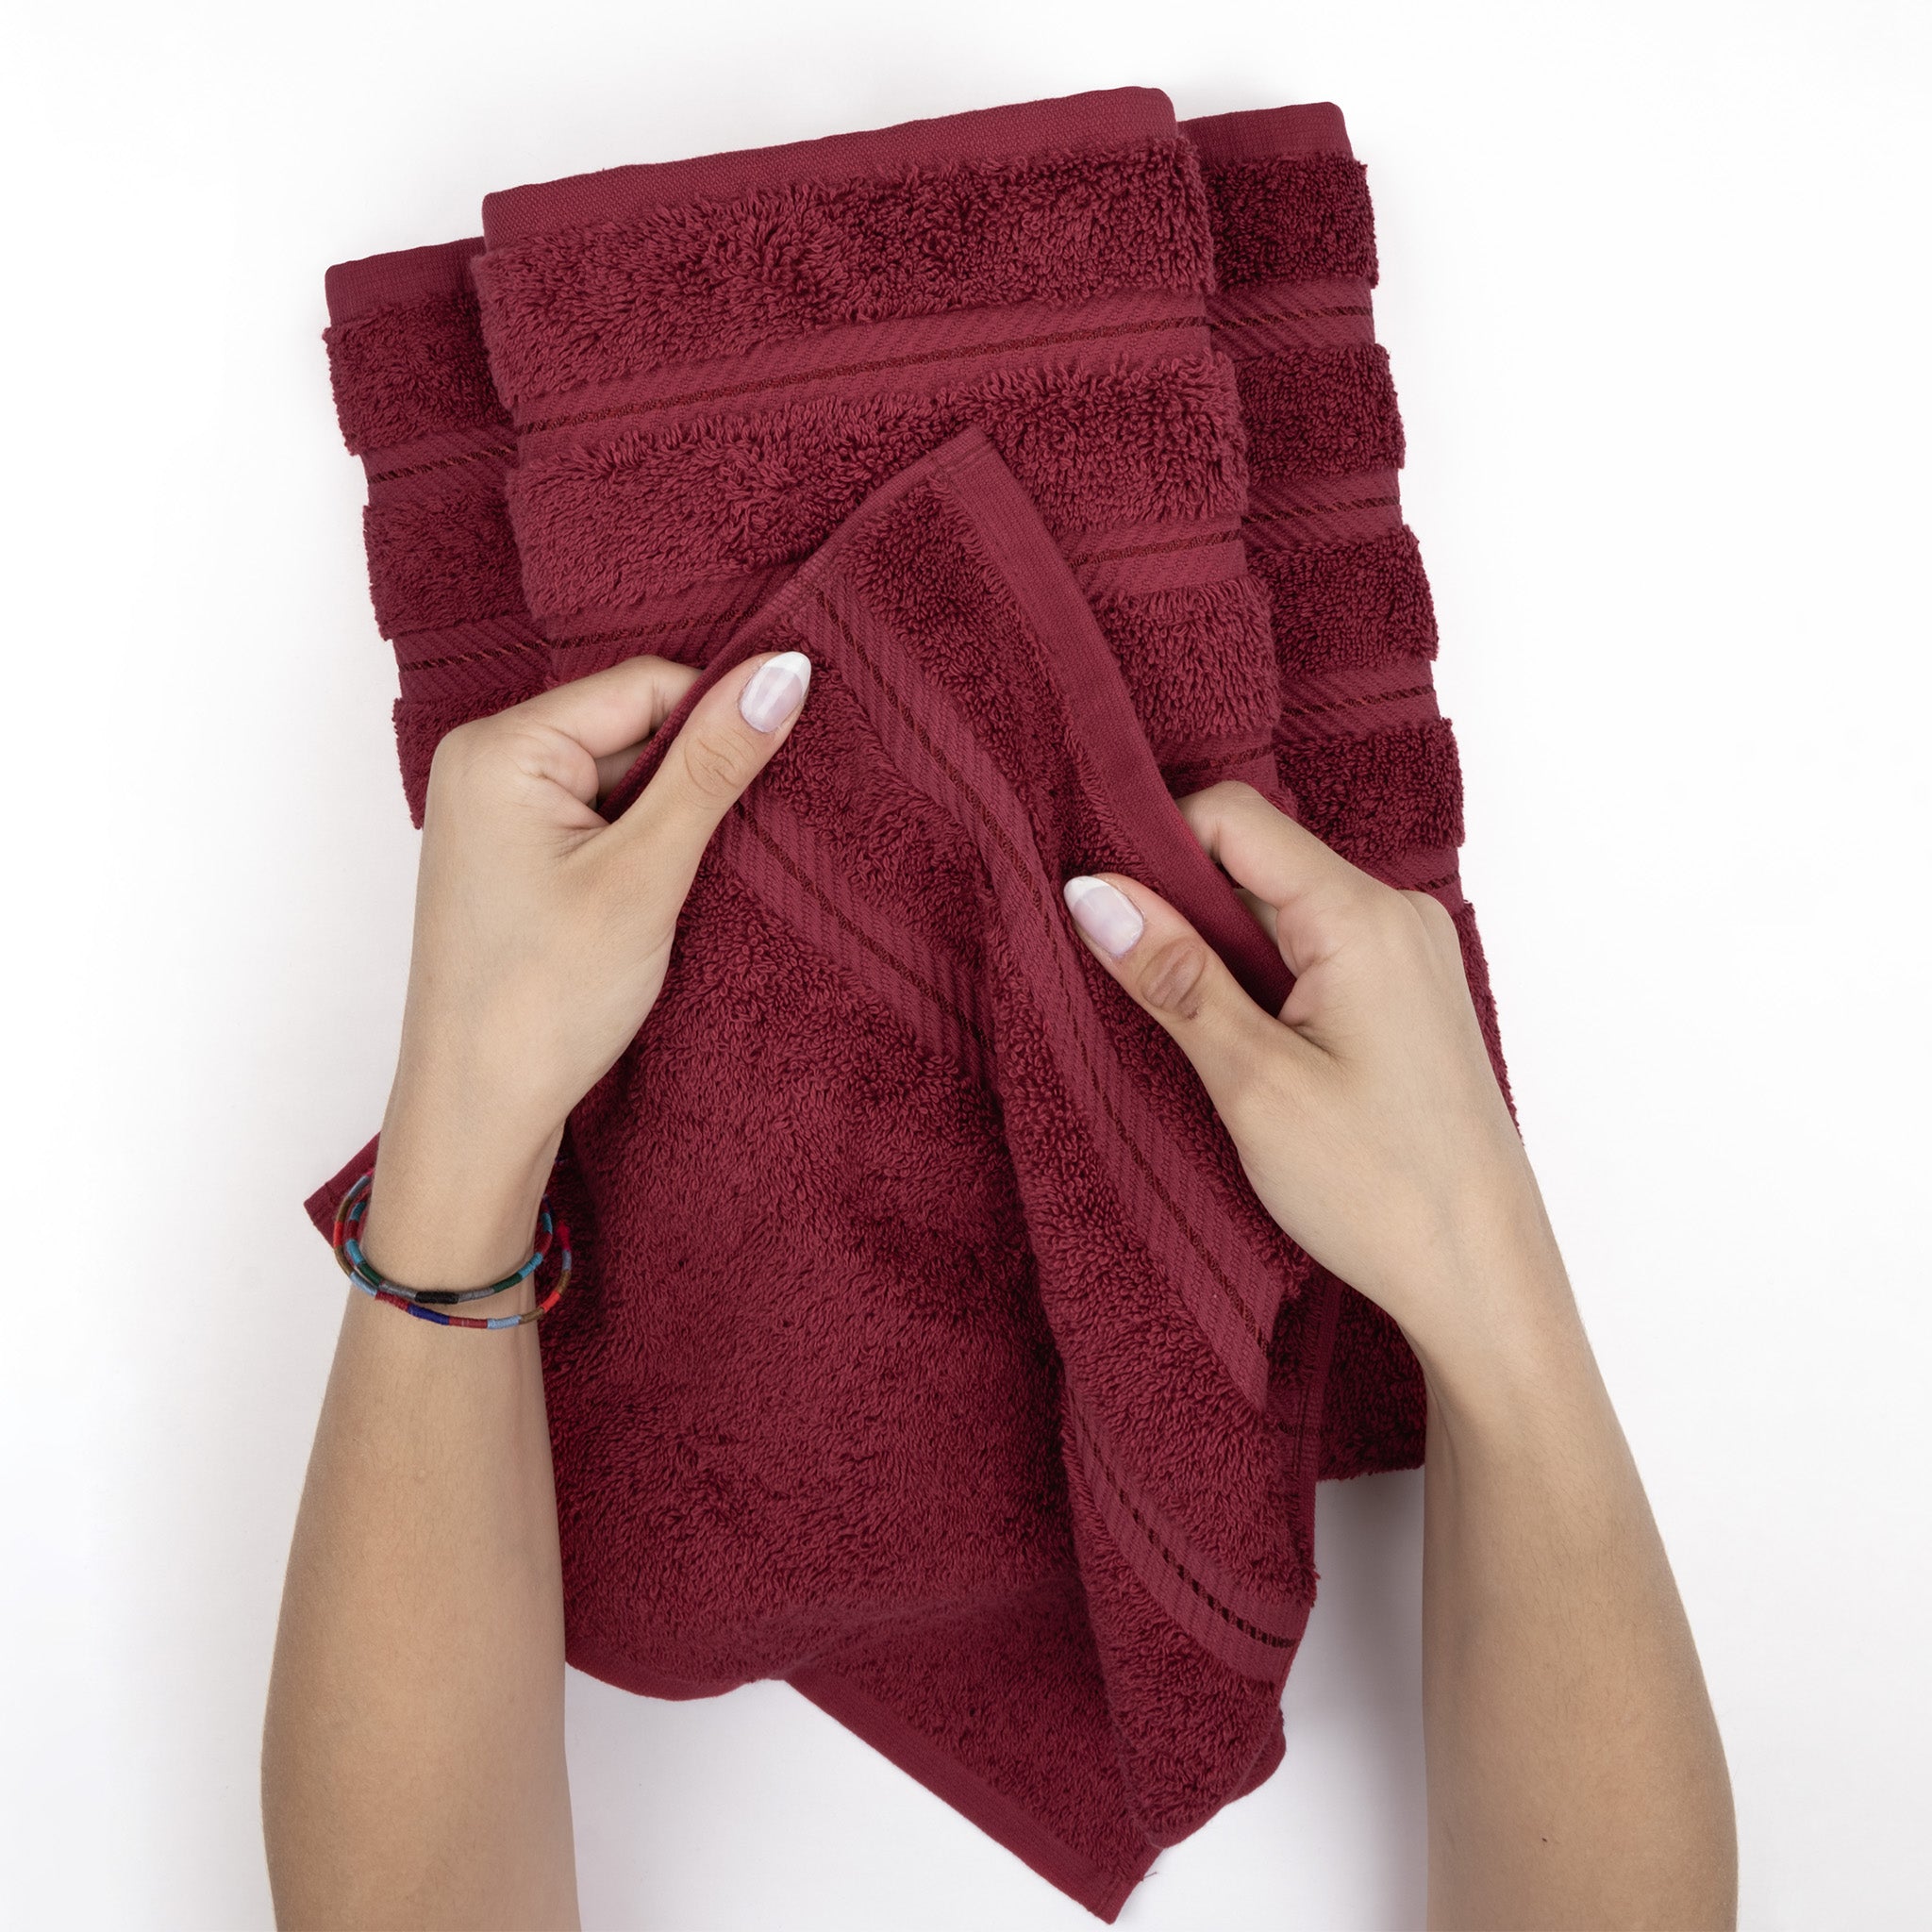 American Soft Linen 4 Pack Washcloth Set, 100% Cotton Washcloth Hand Face  Towels For Bathroom And Kitchen,red : Target